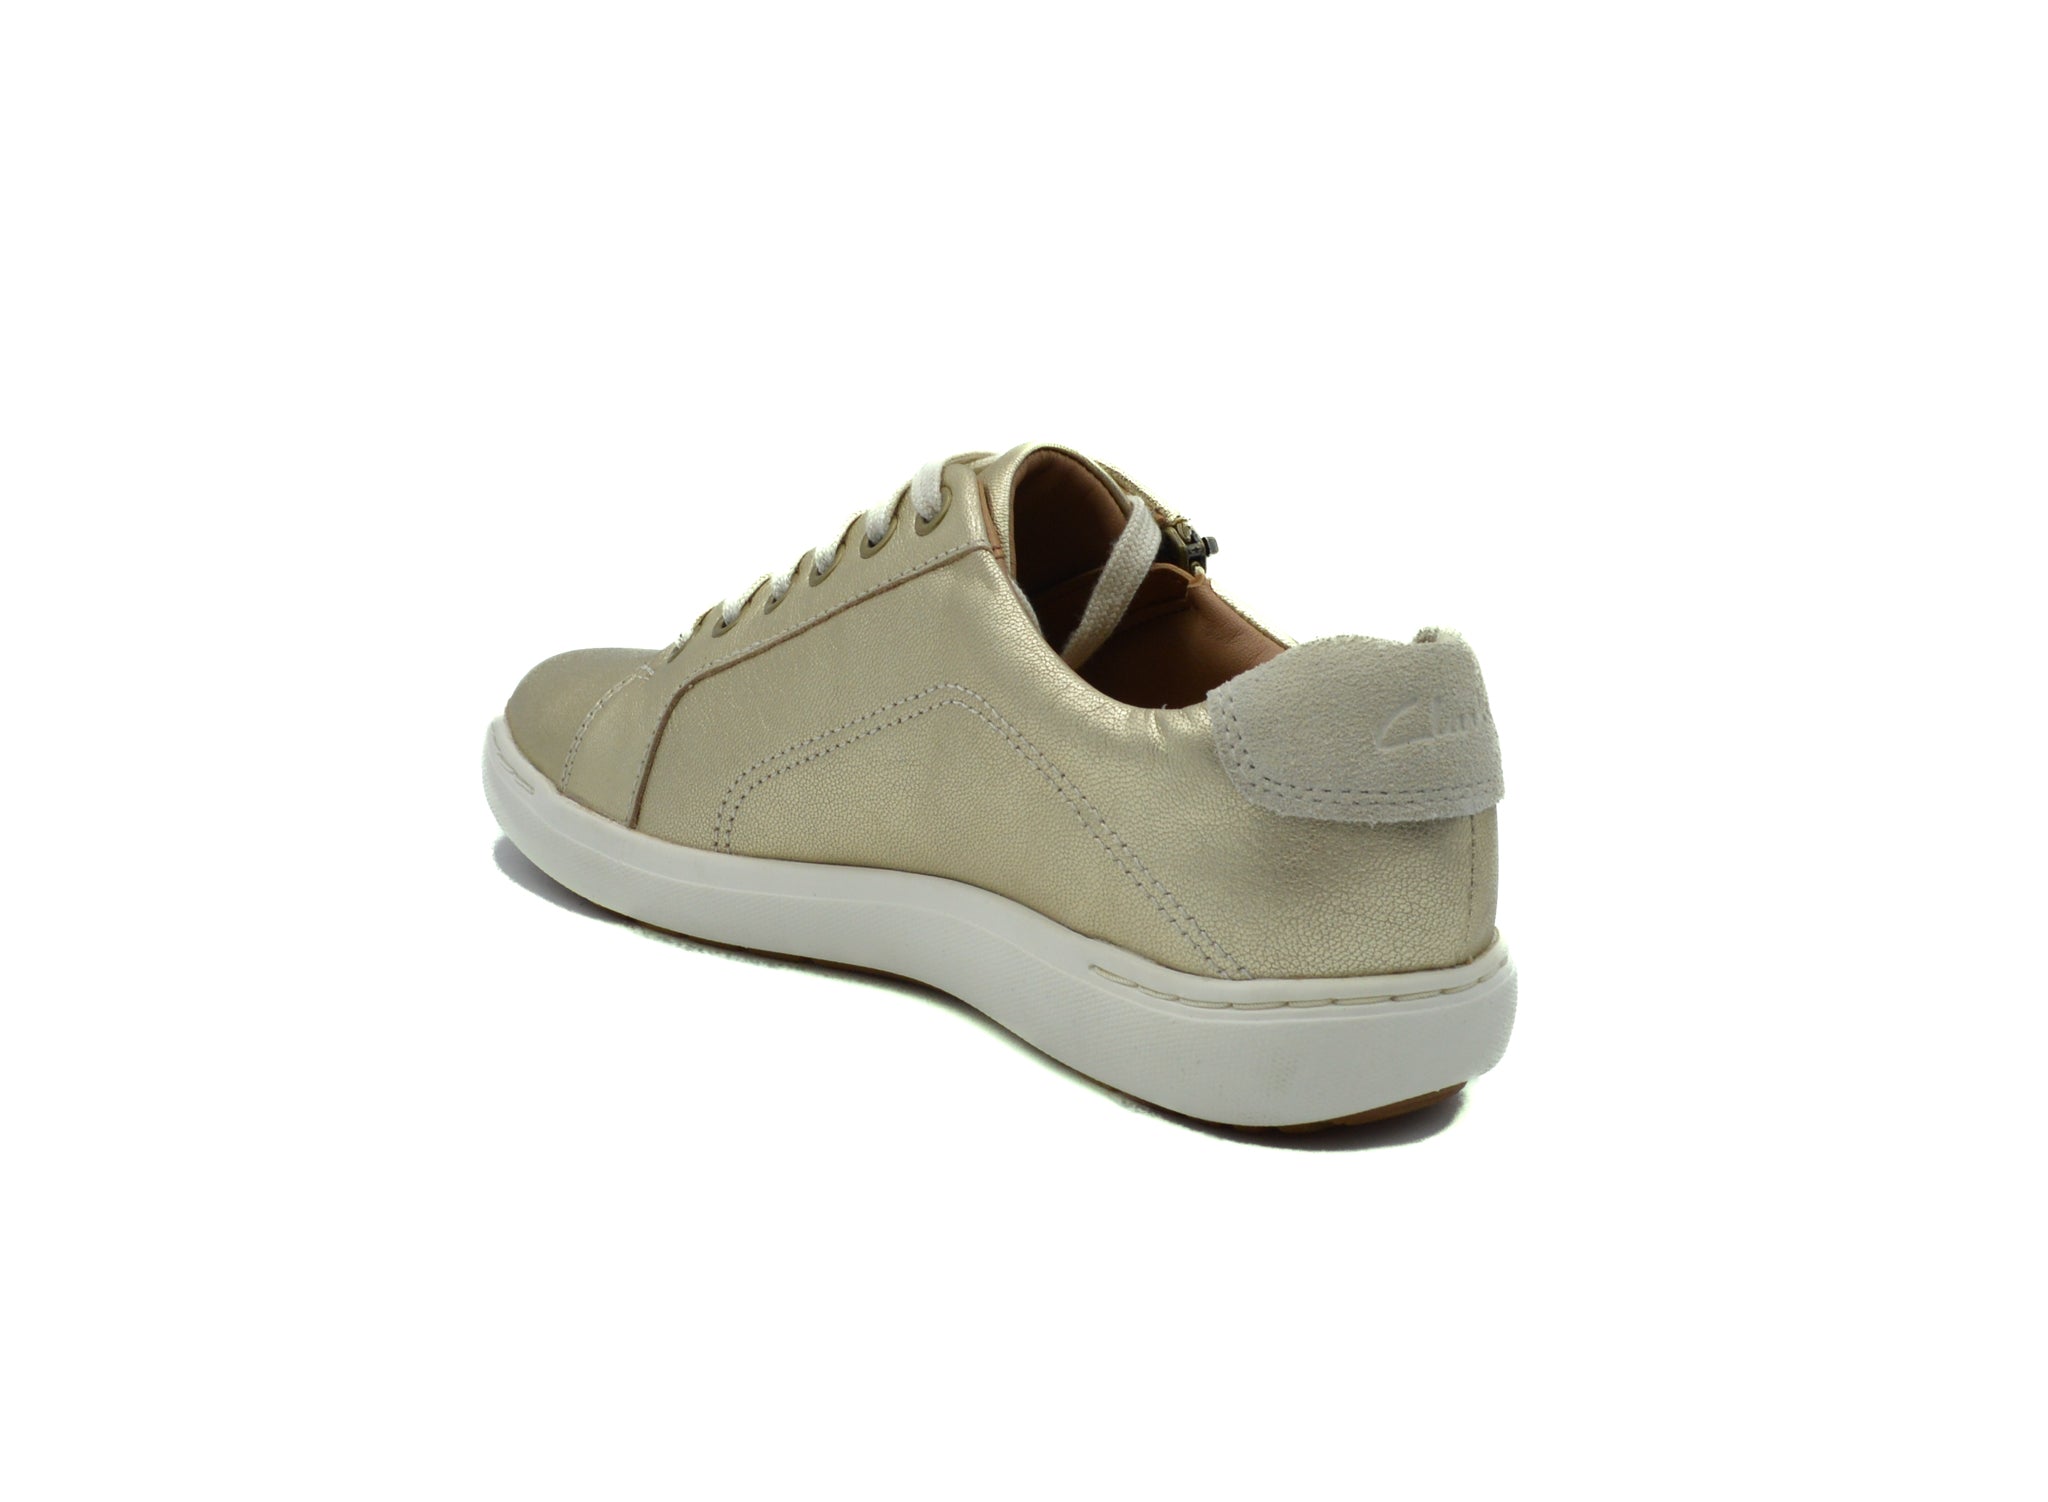 CLARKS Nalle Lace